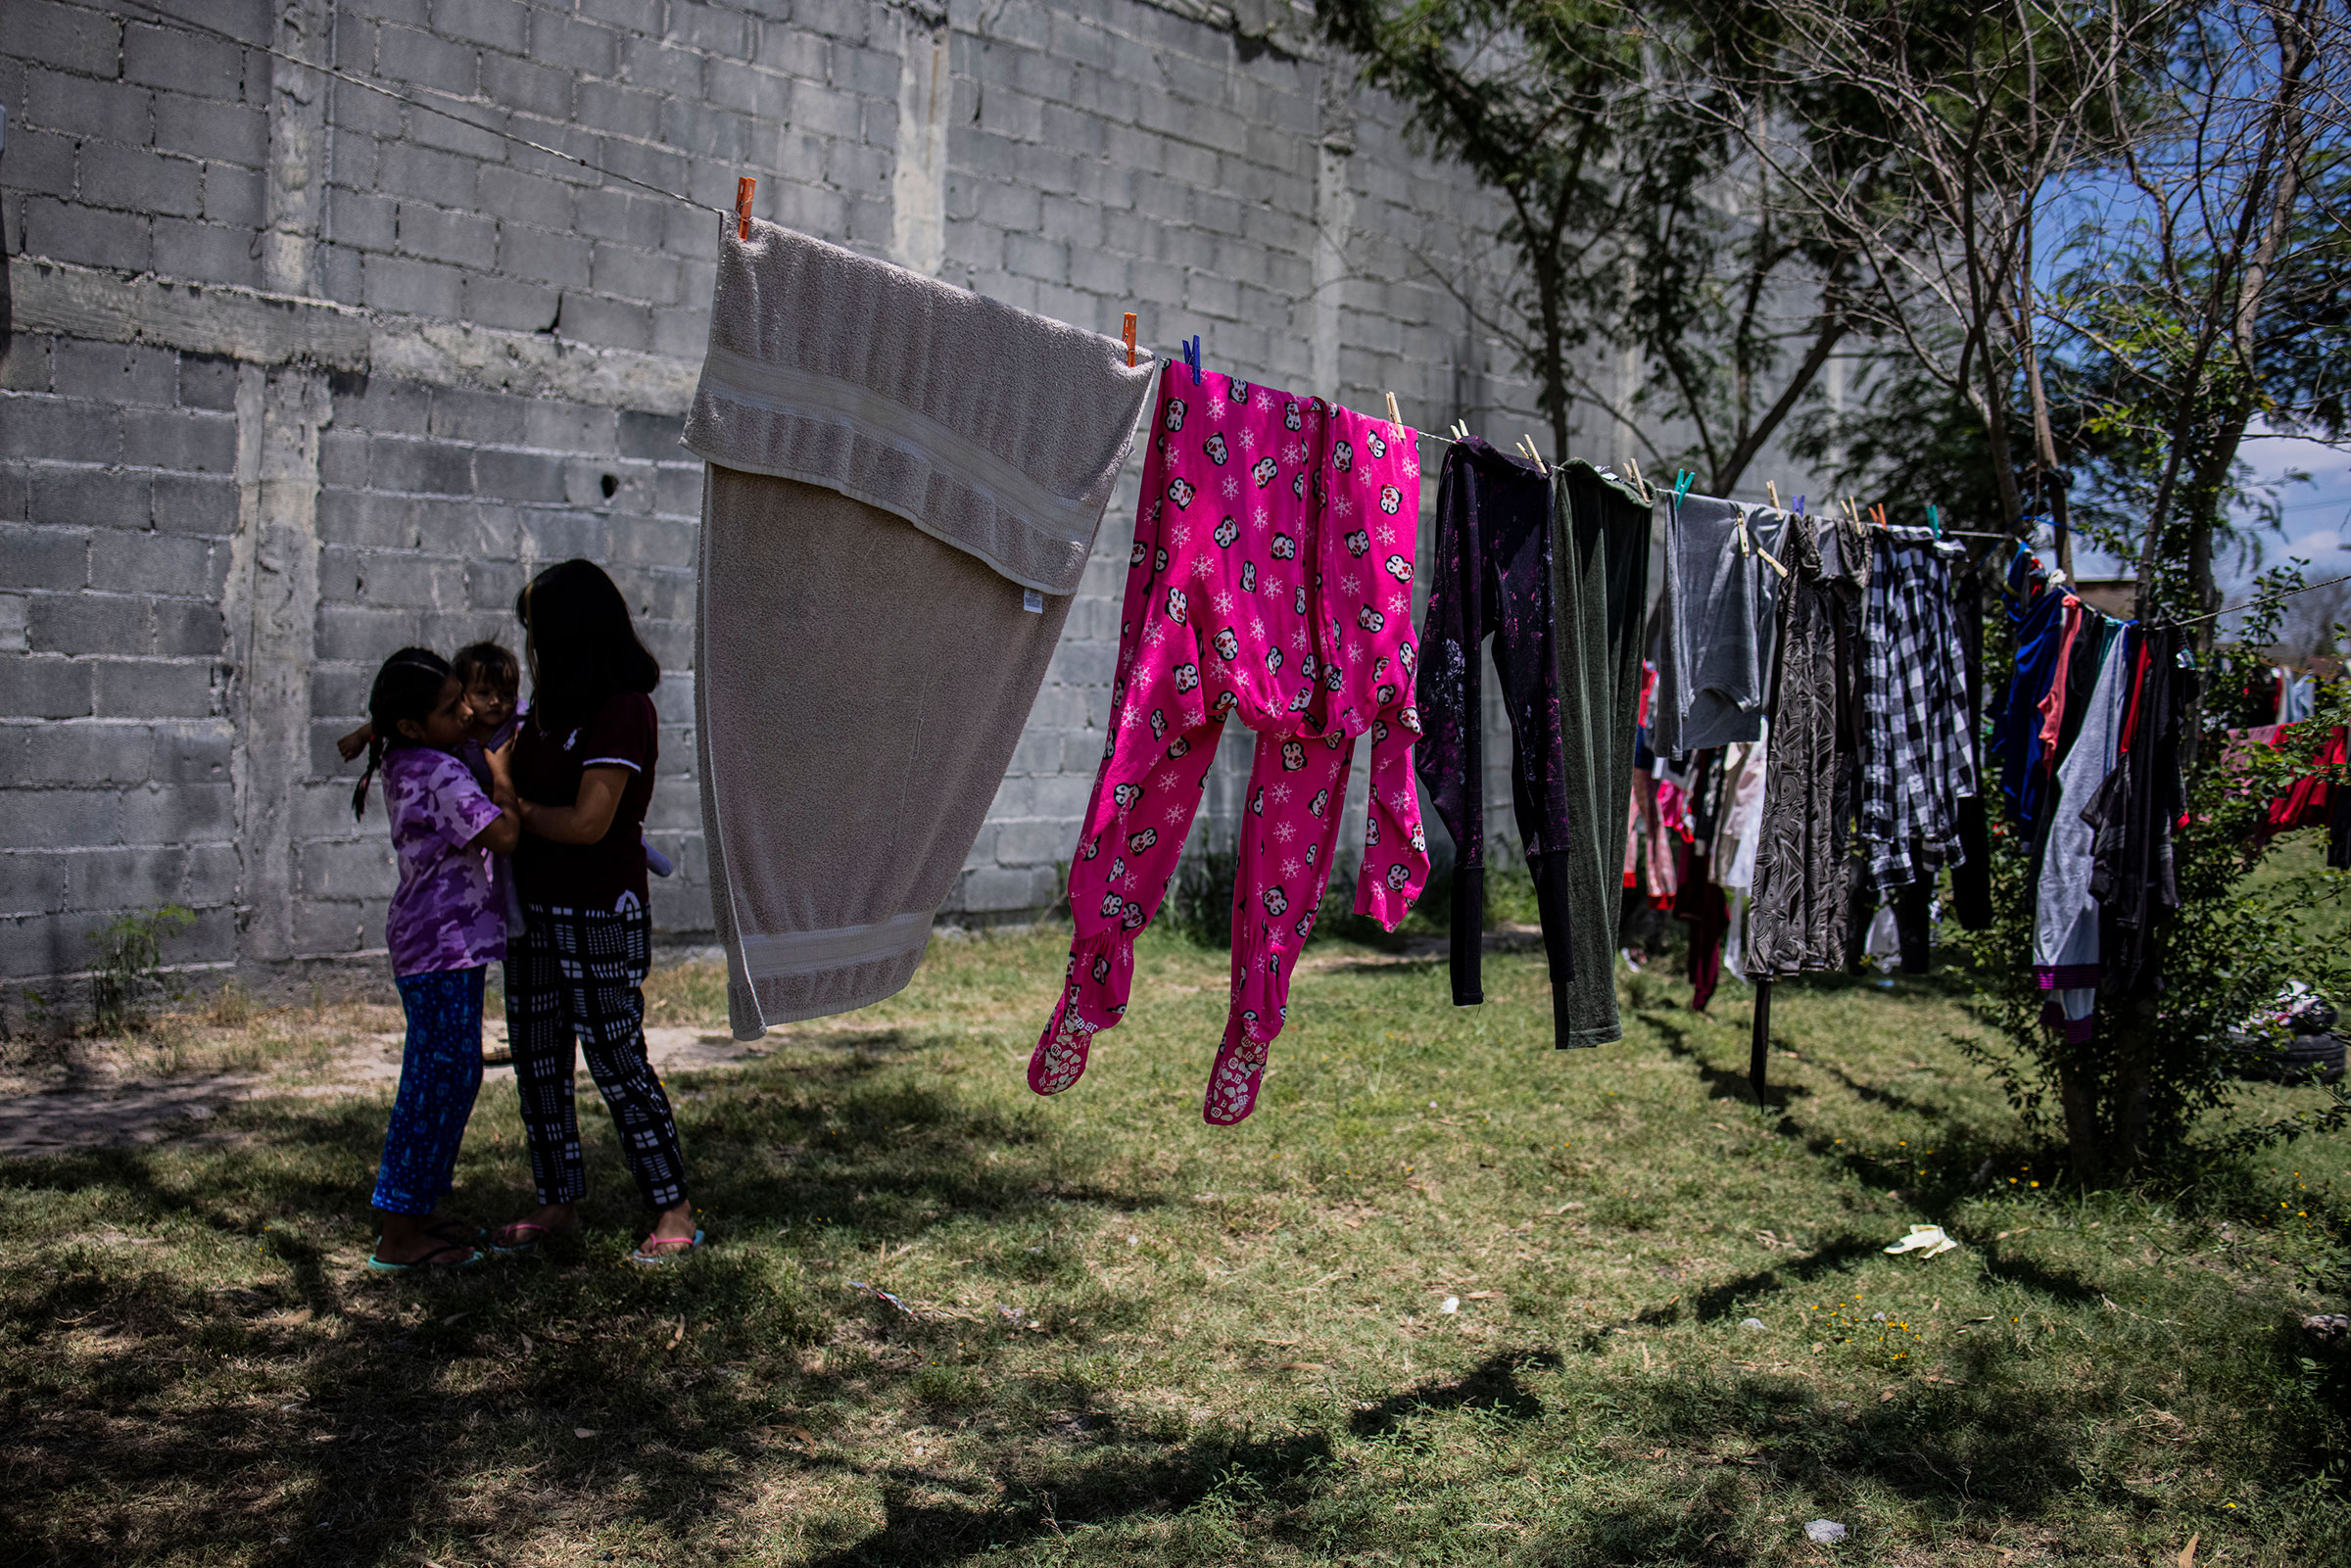 The Palma family spend time near clotheslines at the Viento Recio church in Matamoros in the Mexican state of Tamaulipas on May 7, 2021. They fled the Mexican state of Guerrero after receiving death threats from an organized crime group. (Yael Martinez—Magnum Photos for TIME)